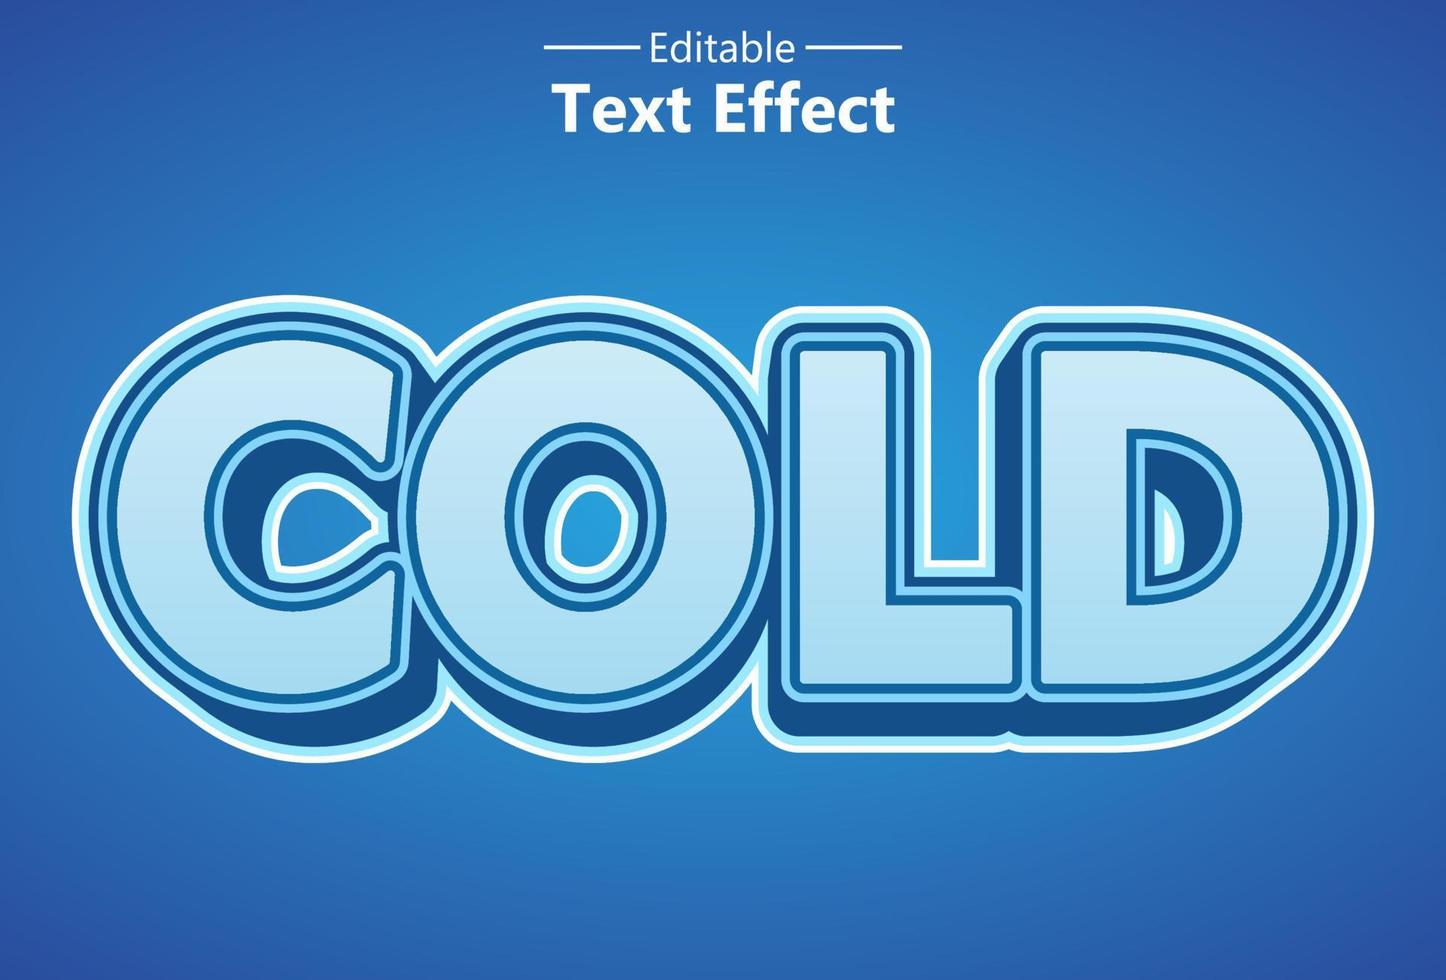 cold text effect with blue color editable for promotion. vector